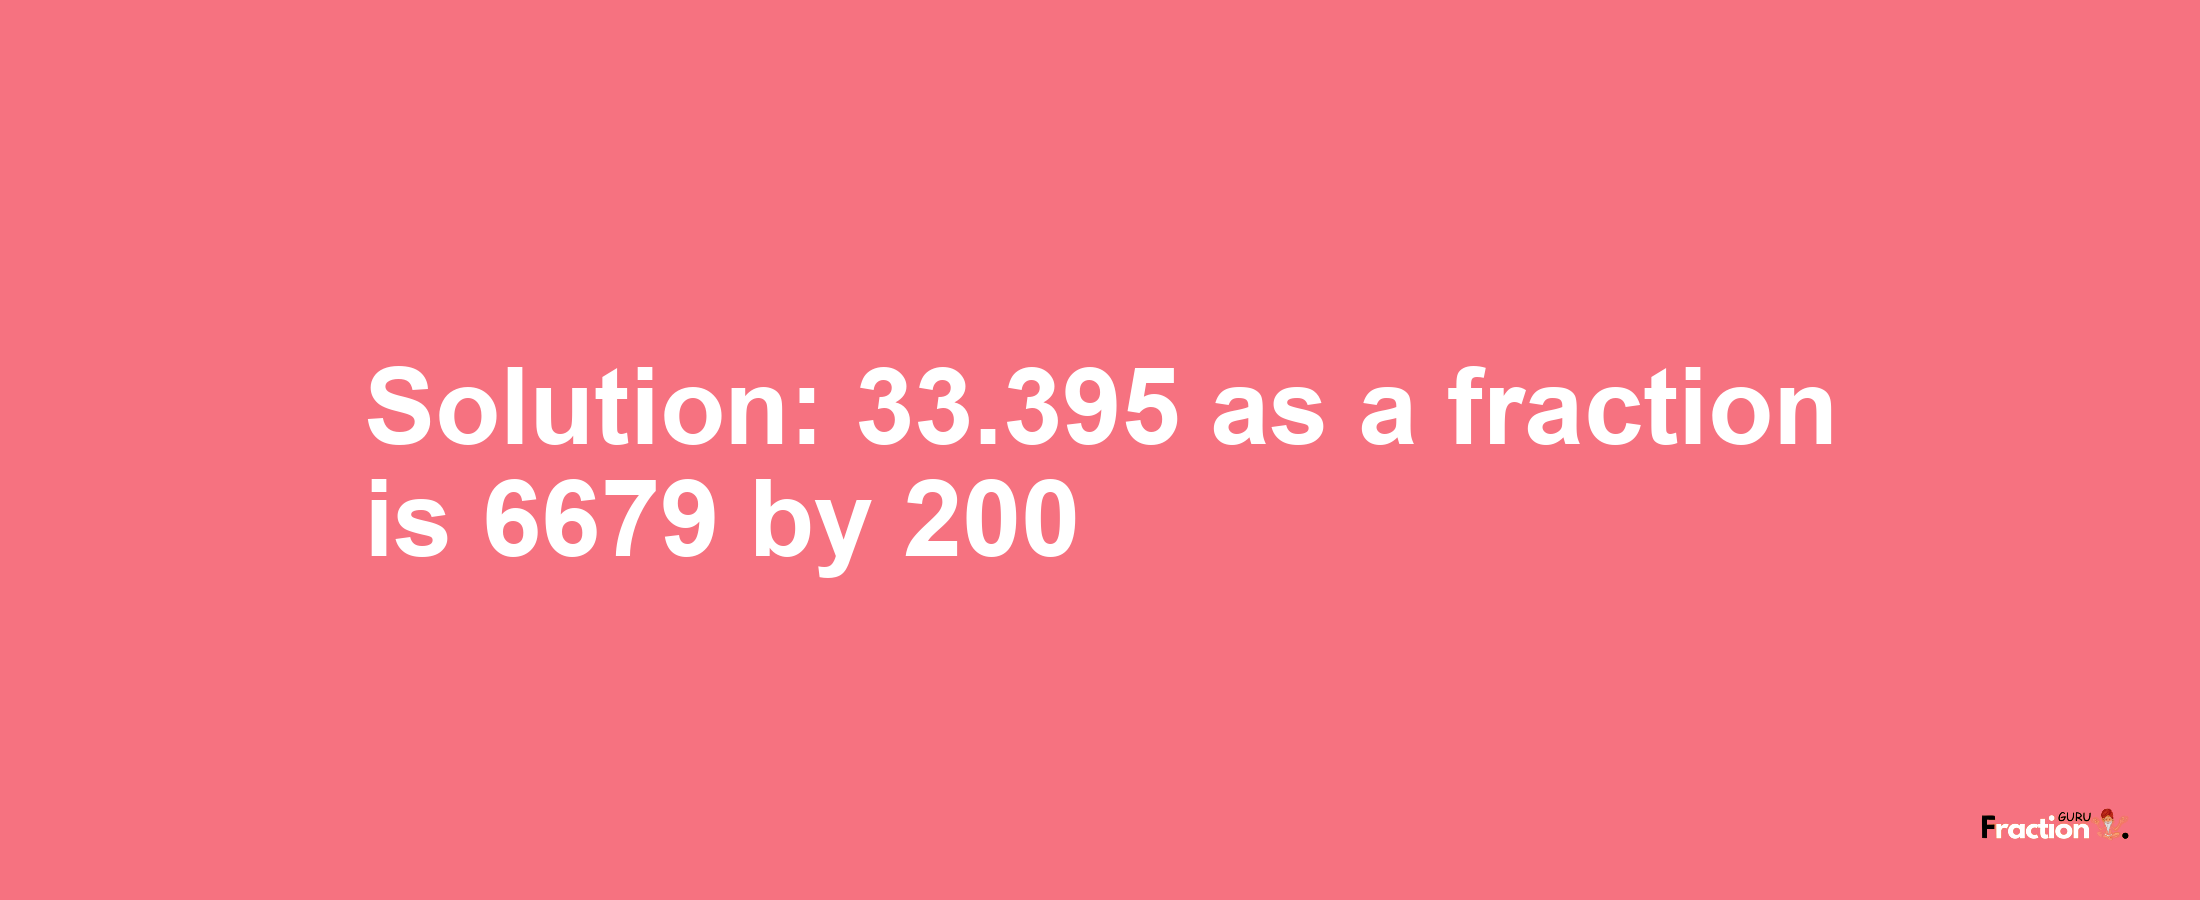 Solution:33.395 as a fraction is 6679/200